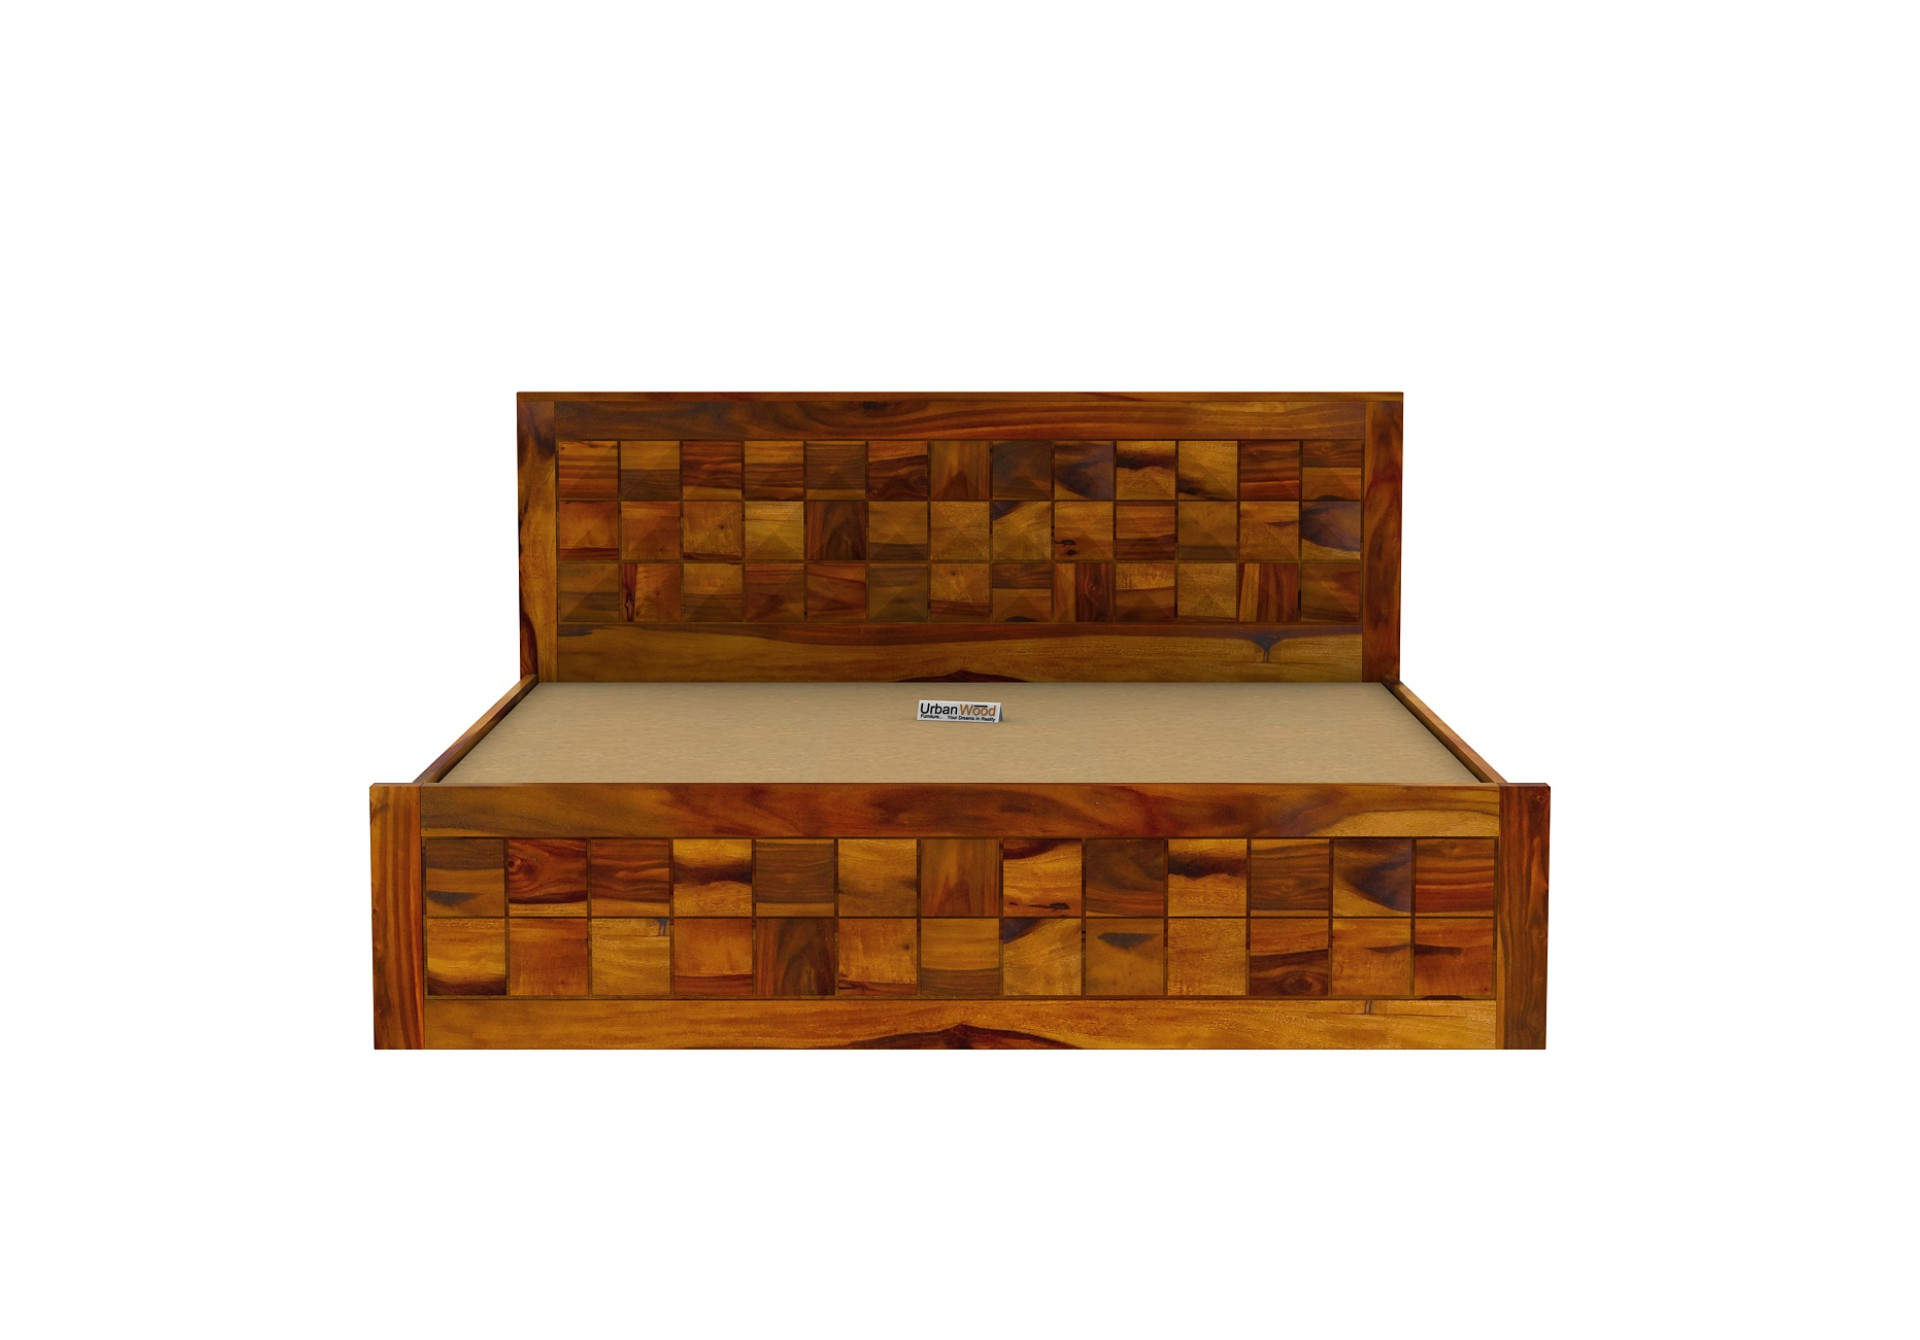 Morgana Hydraulic Storage Bed (Queen Size, Honey Finish)